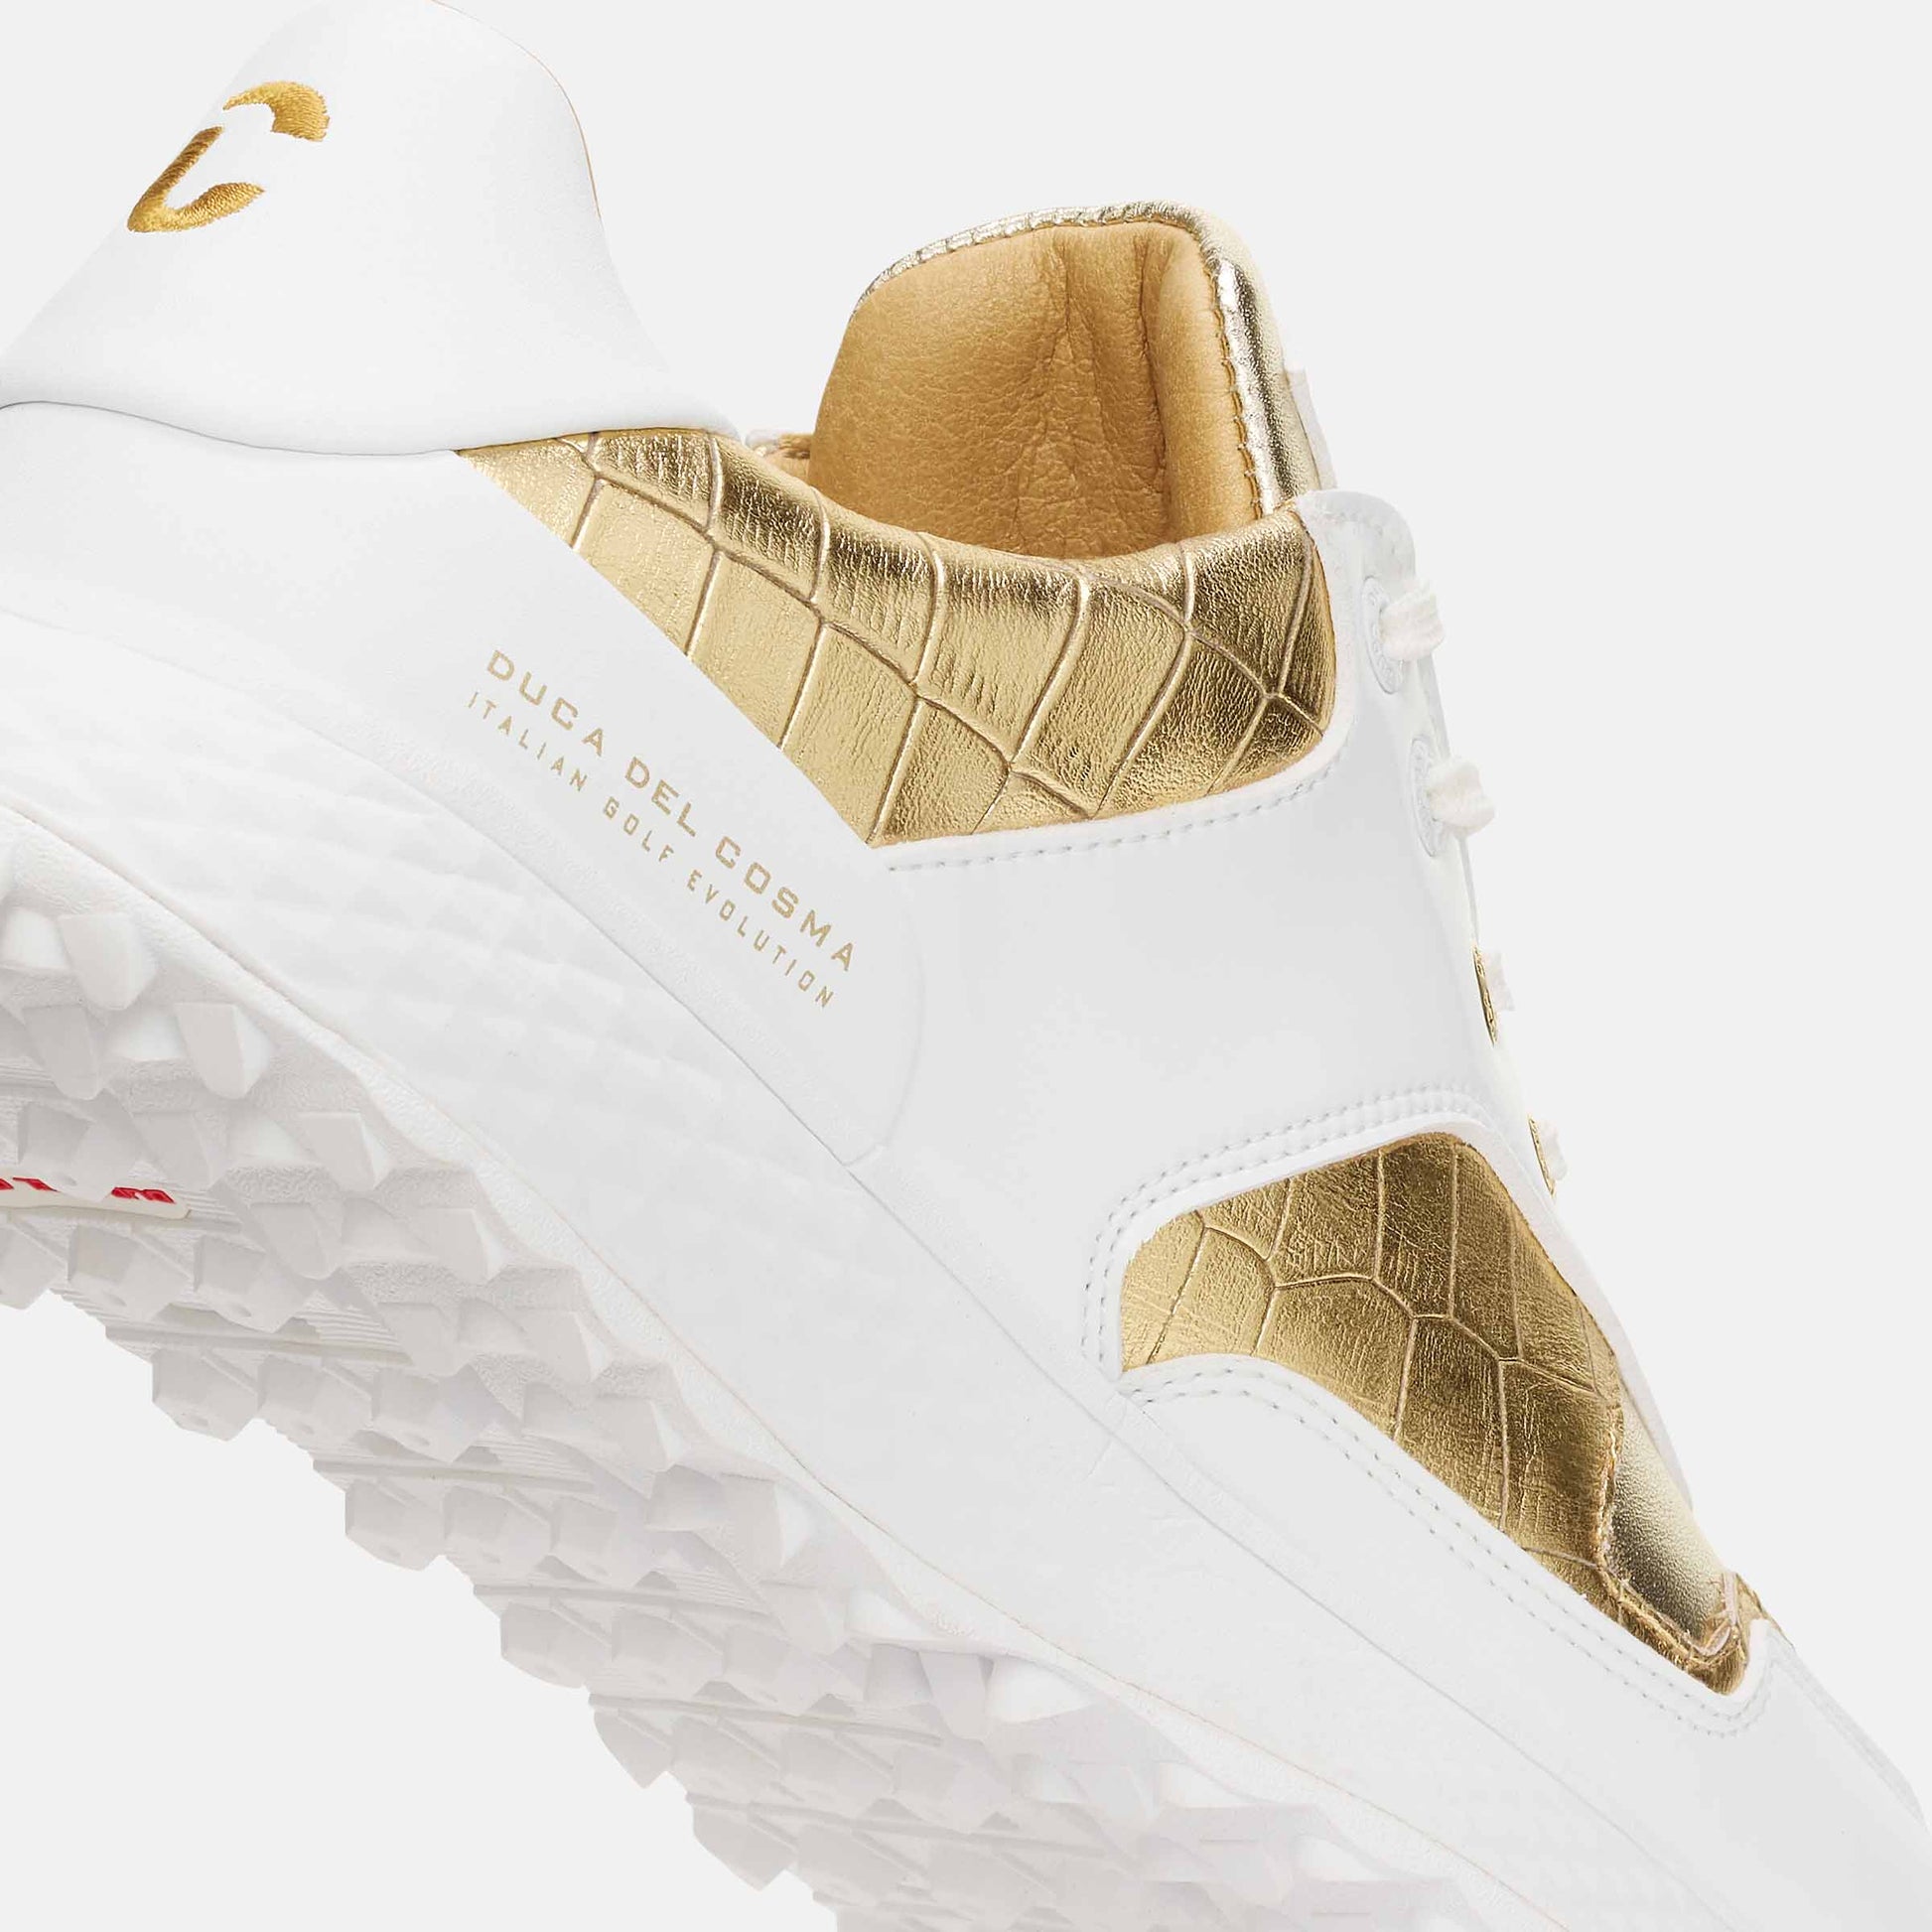 White Golf Shoes, Gold Golf Shoes, Lightweight Women's Golf Shoes Duca del Cosma, Spikeless Golf Shoes, Waterproof Golf Shoes.